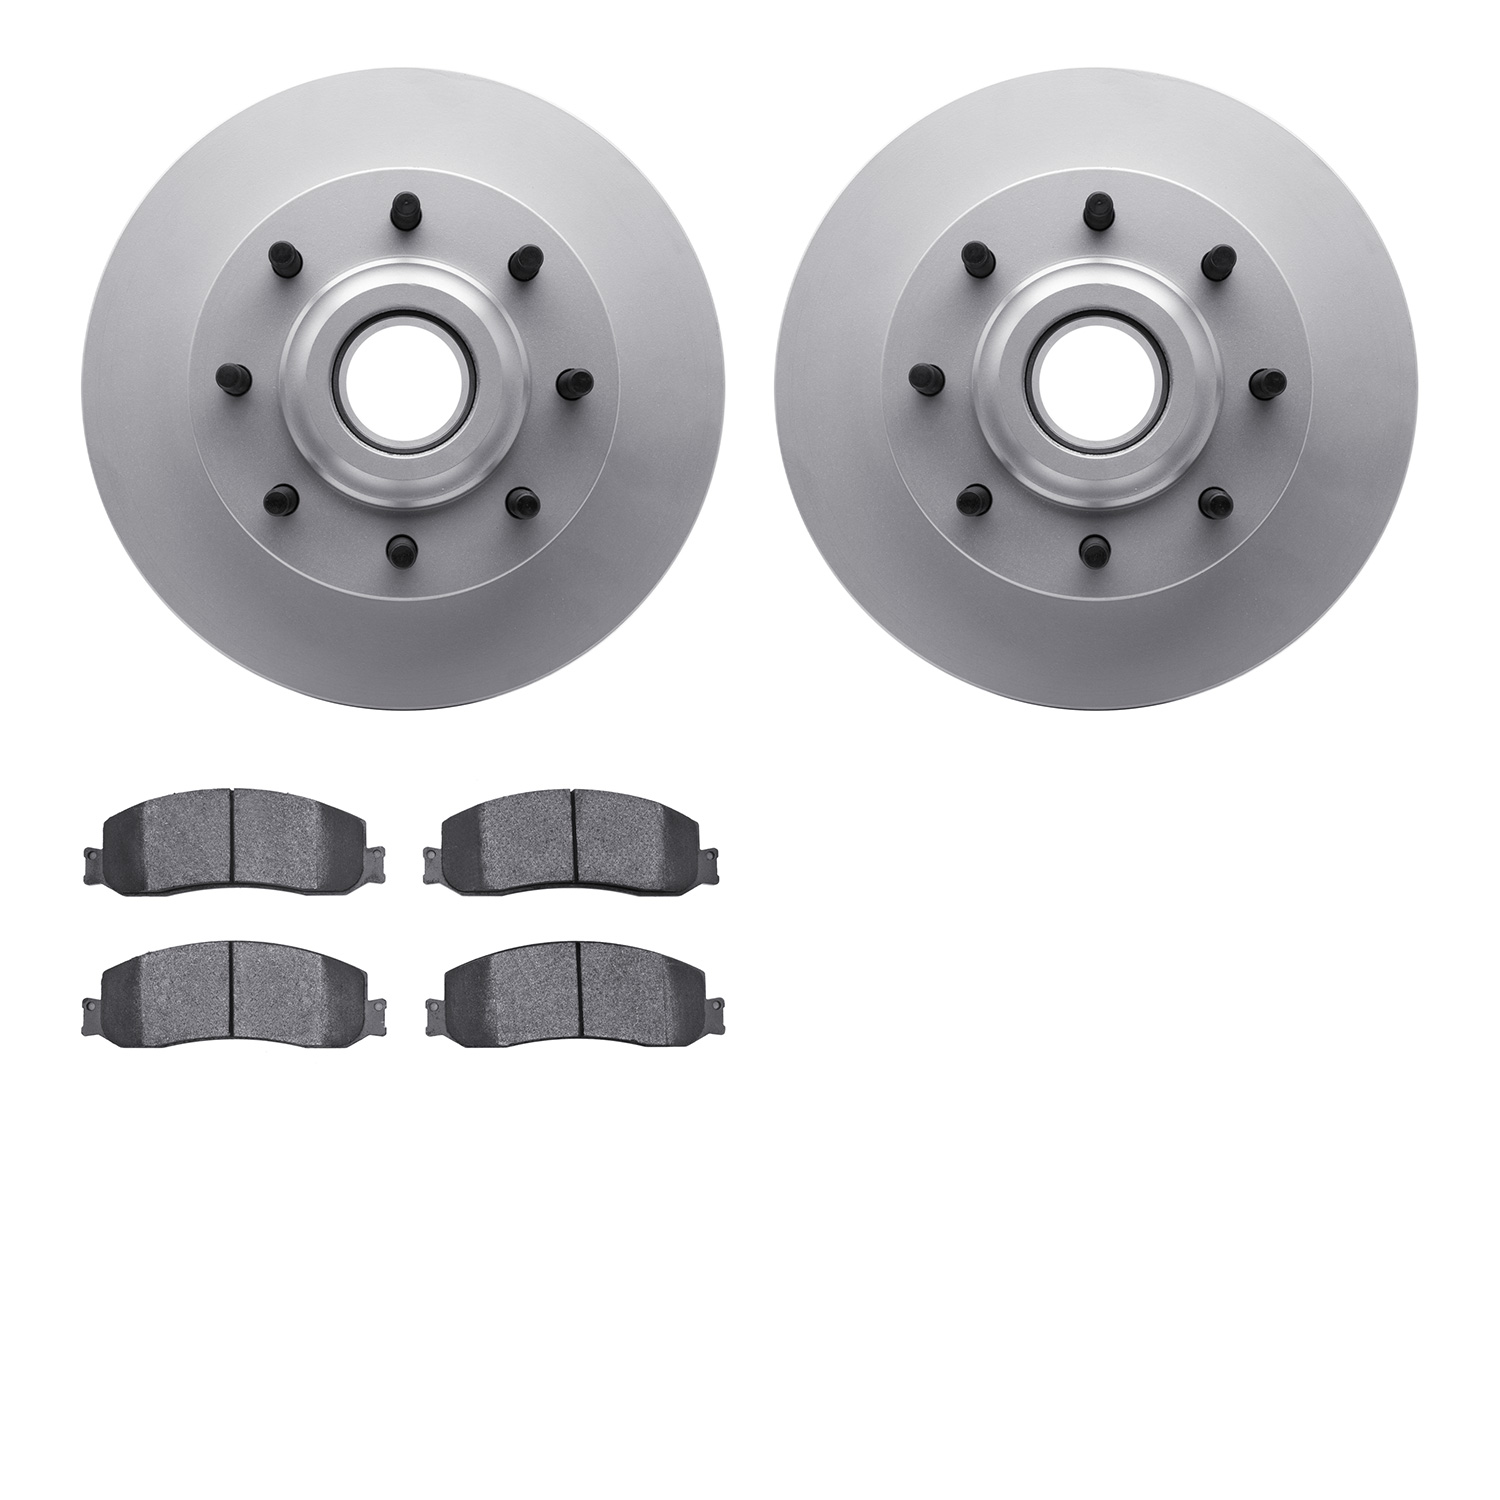 4402-54064 Geospec Brake Rotors with Ultimate-Duty Brake Pads Kit, 2012-2012 Ford/Lincoln/Mercury/Mazda, Position: Front